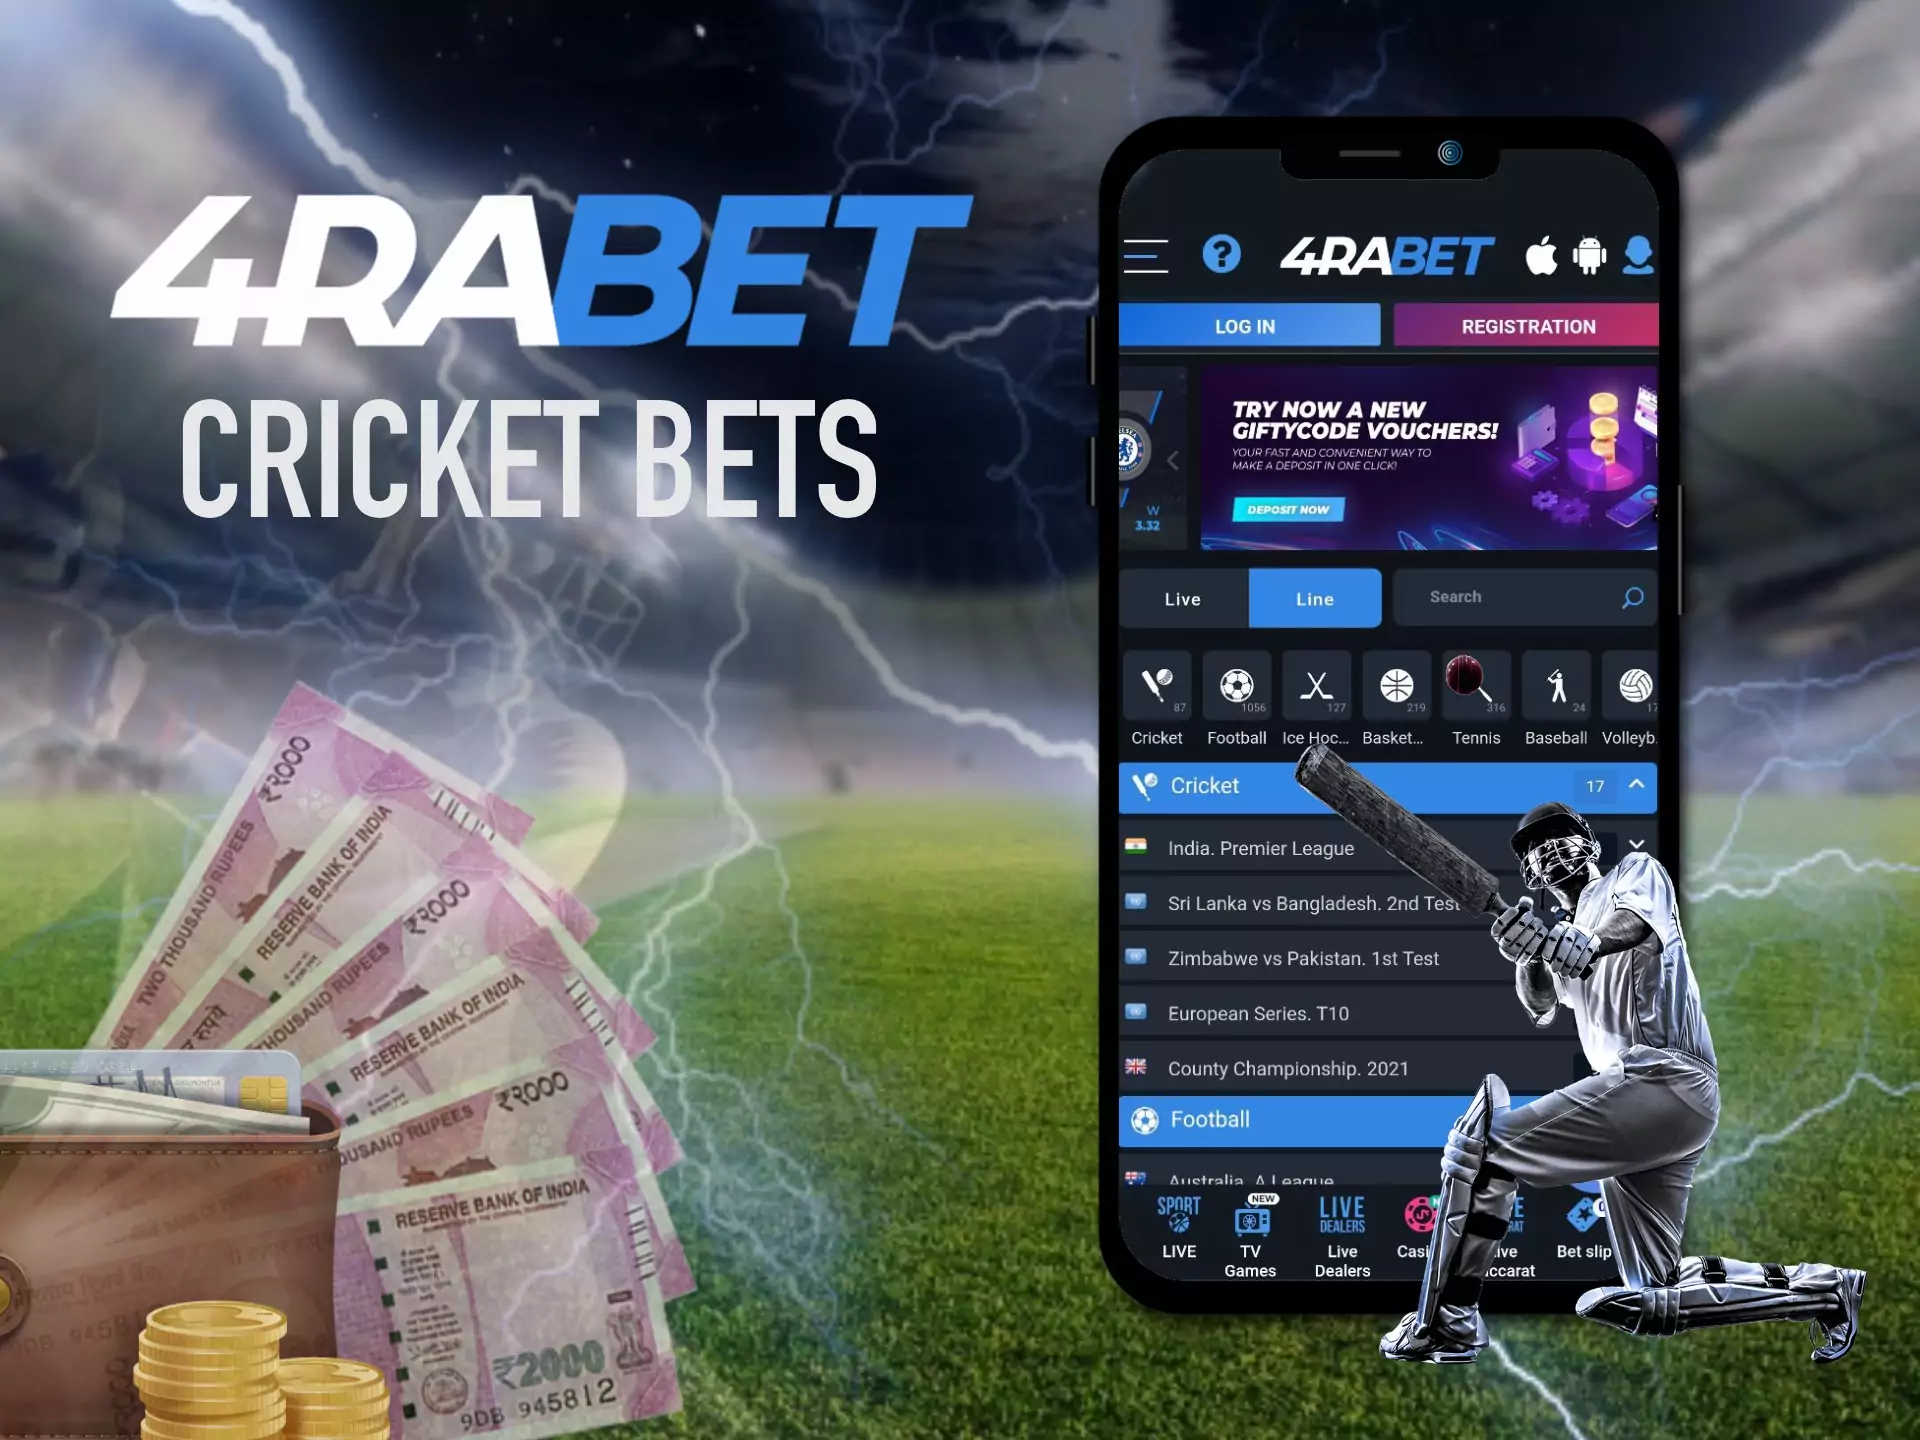 You should create an account and make a deposit at 4rabet to have an opportunity to place bets.